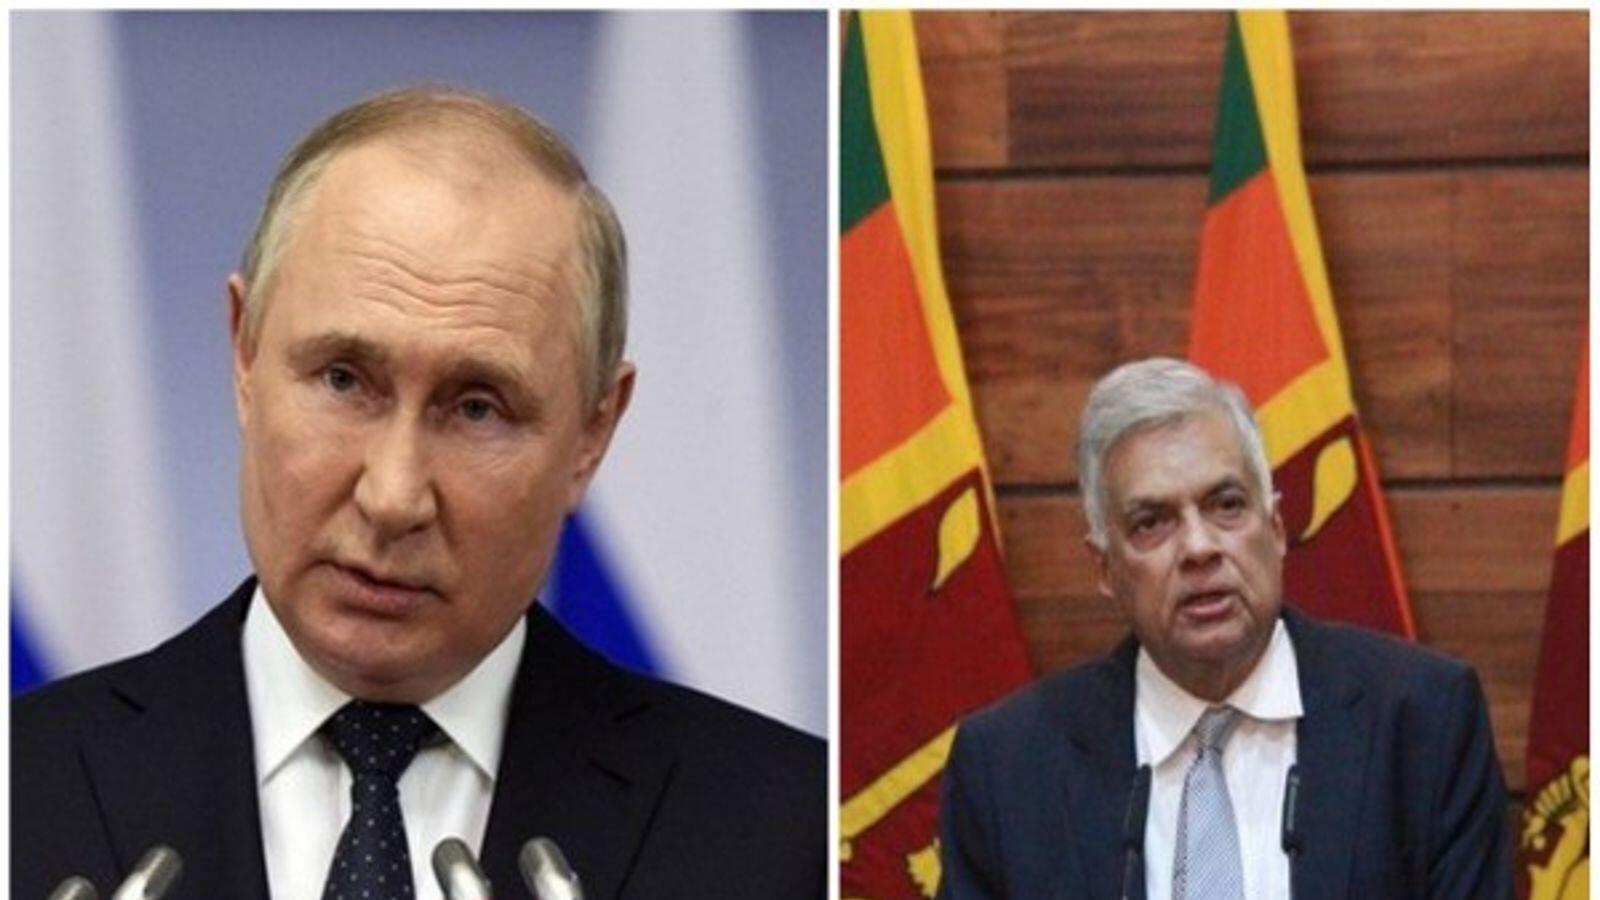 Sri Lanka Foreign Minister meets with Russian ambassador, seeks to enhance relations - News